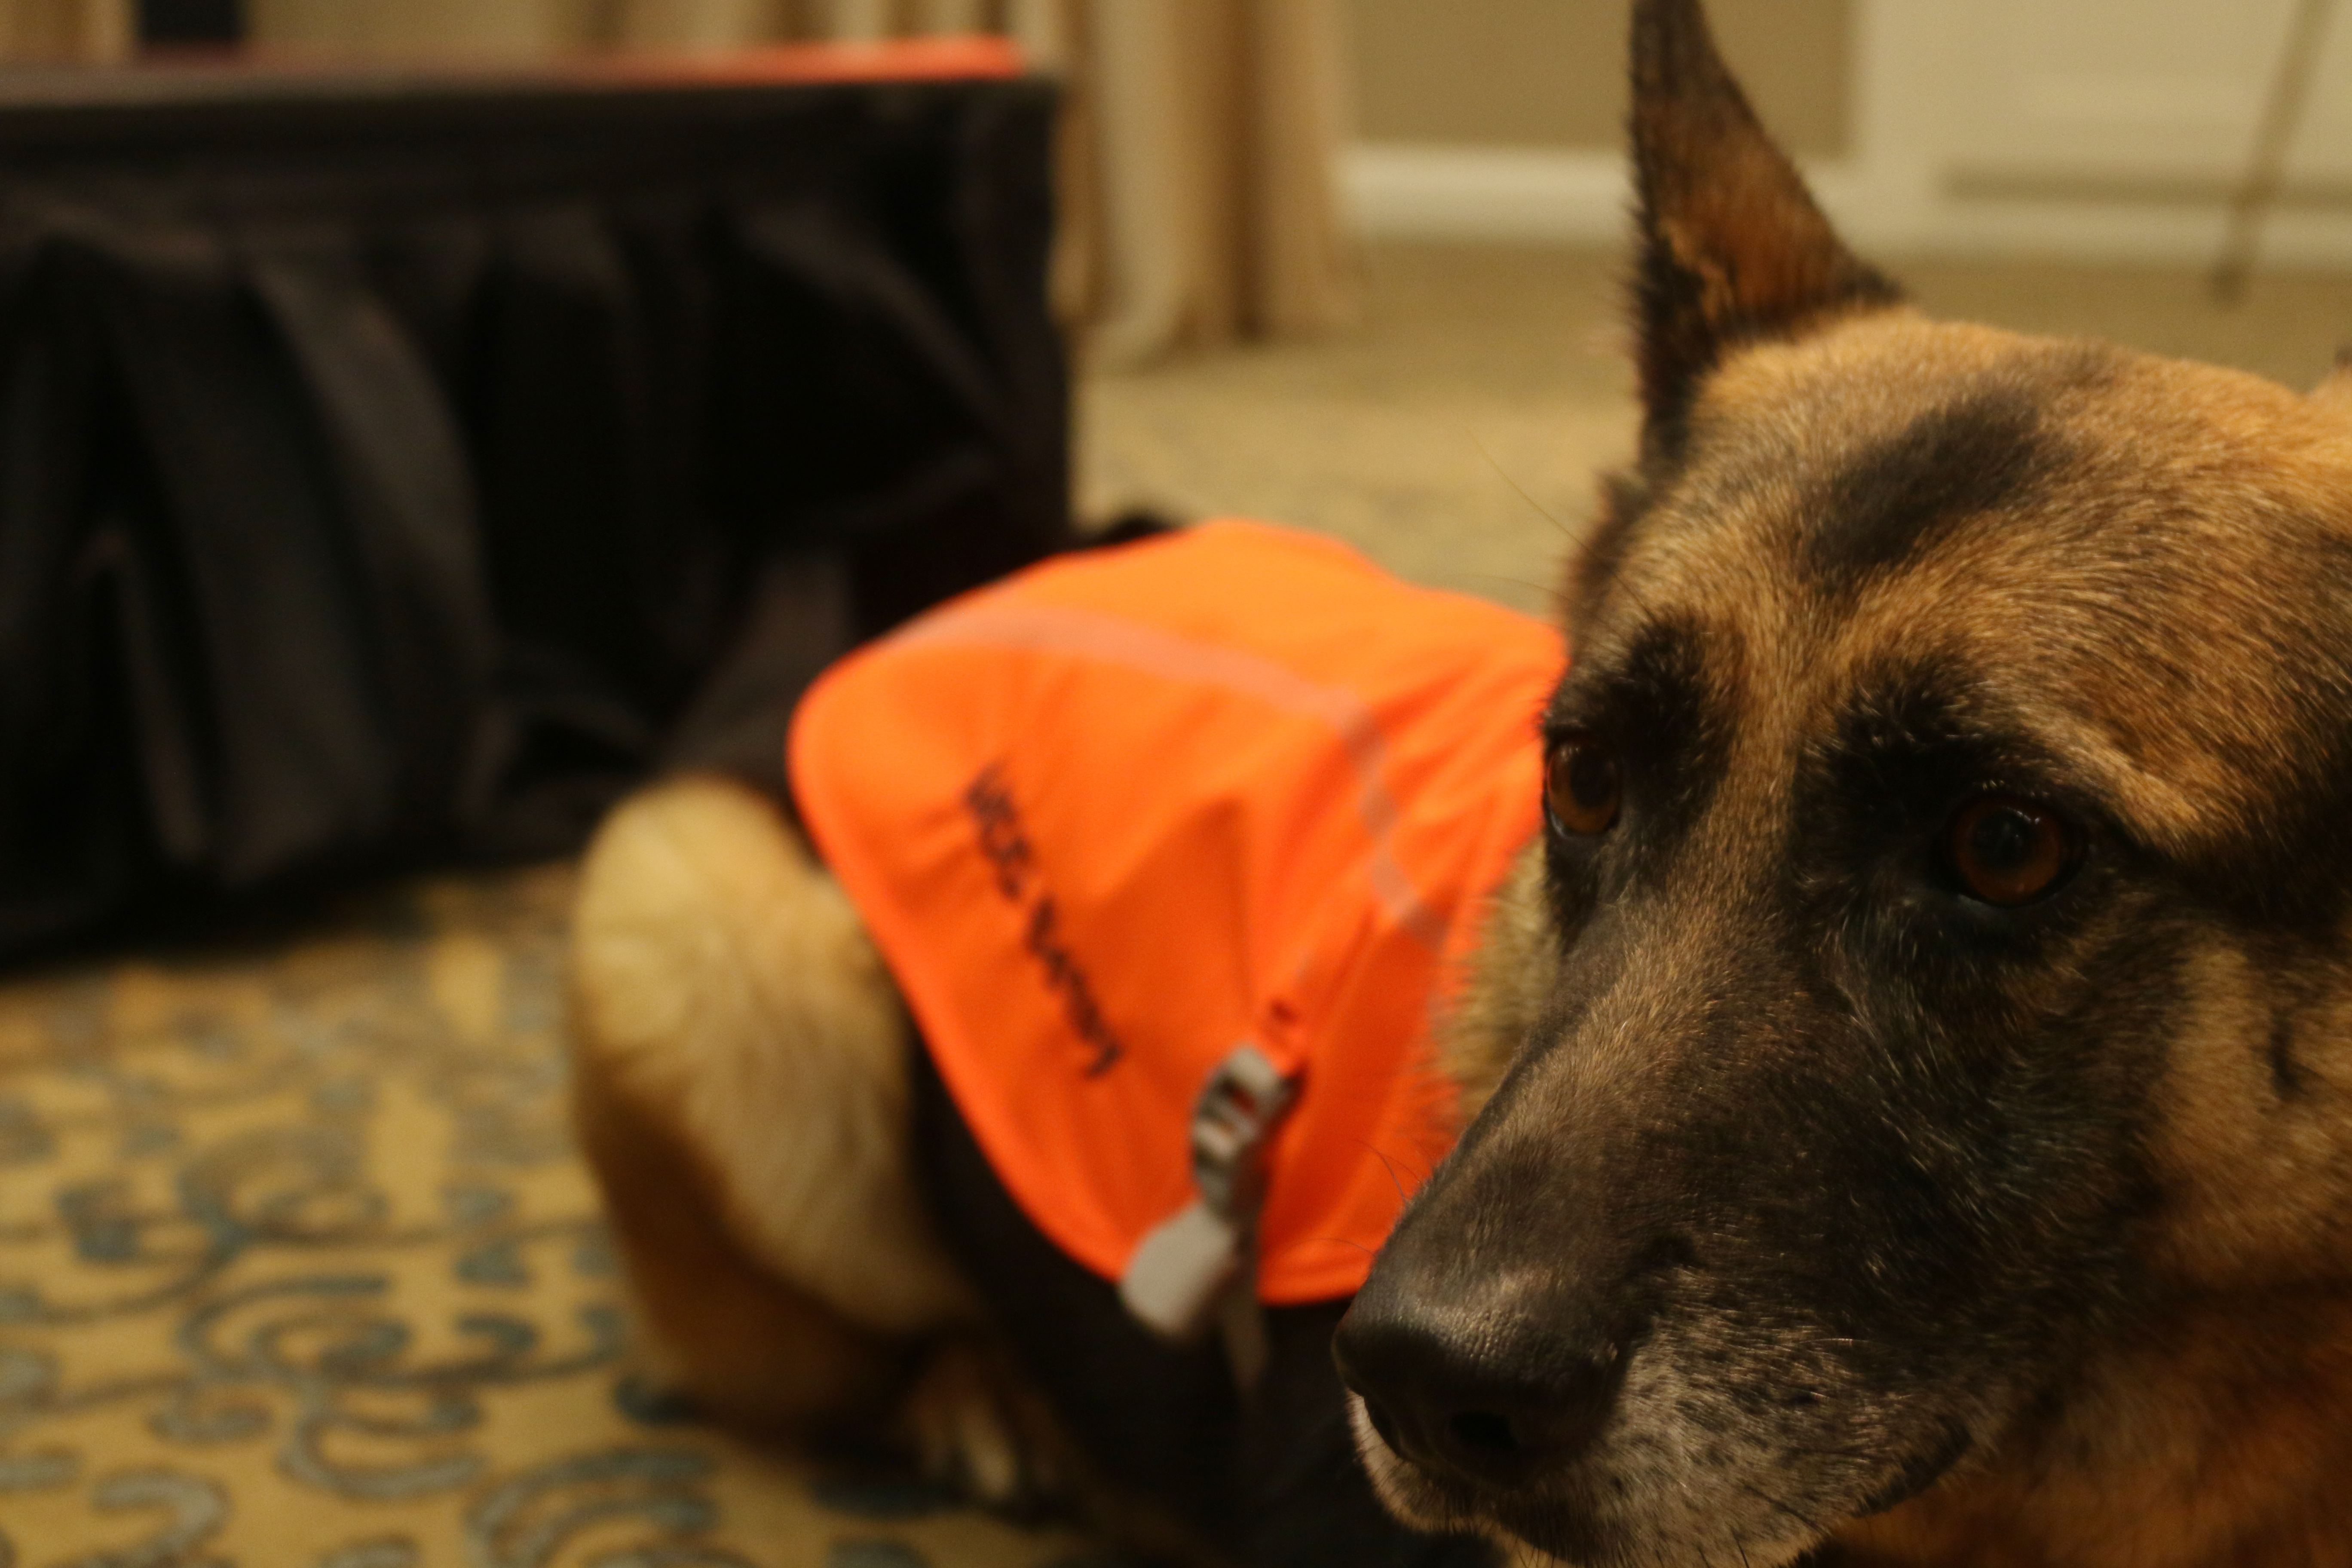 Mine-sniffing dog, trainer win ‘top dog’ award for service